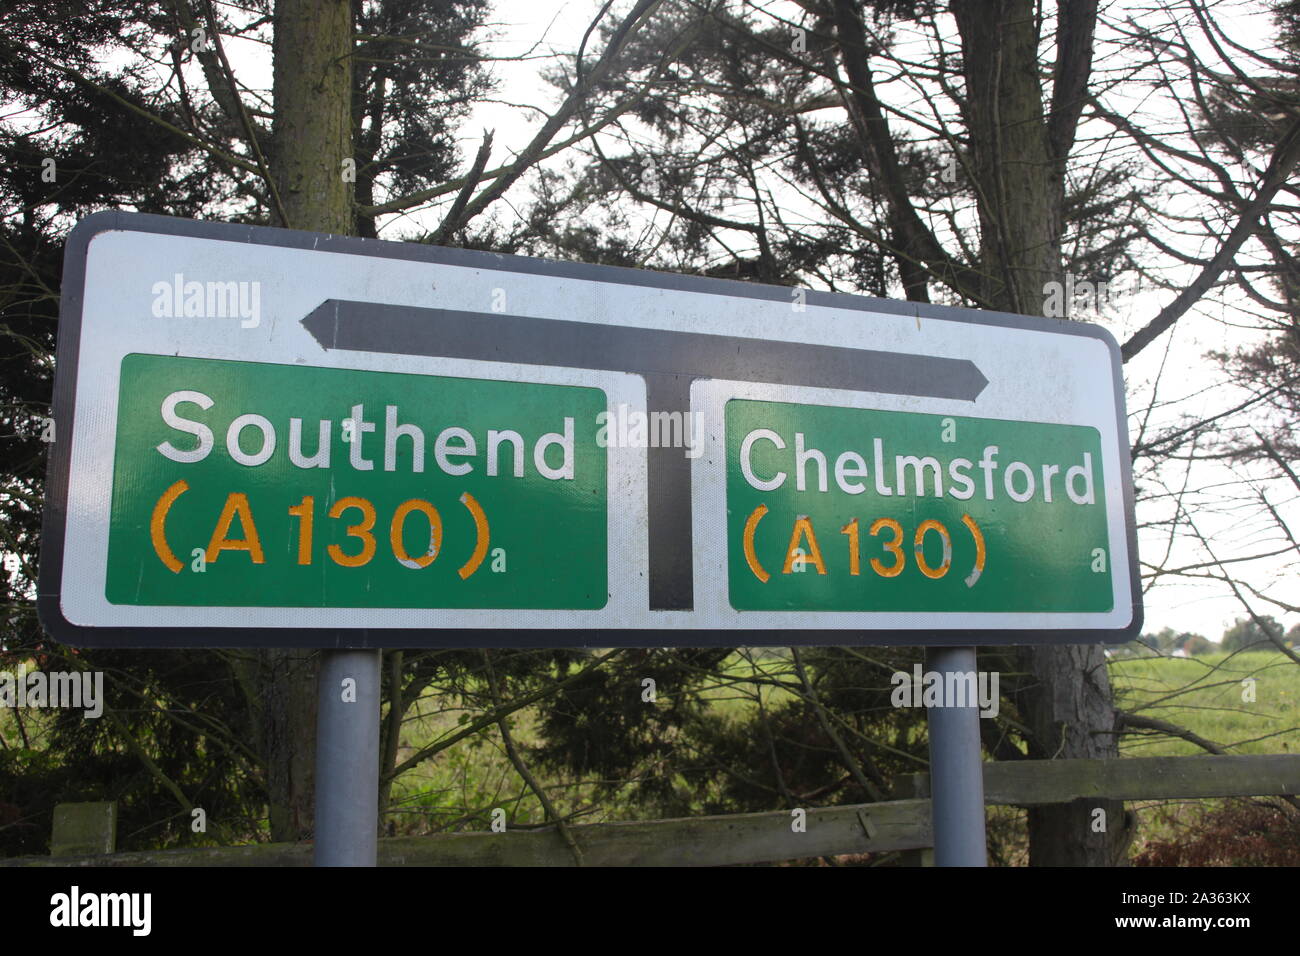 Essex Travel & Roads - Road sign on a section of the A130 with directions to Southend and Chelmsford Routes. Essex, Britain. Stock Photo